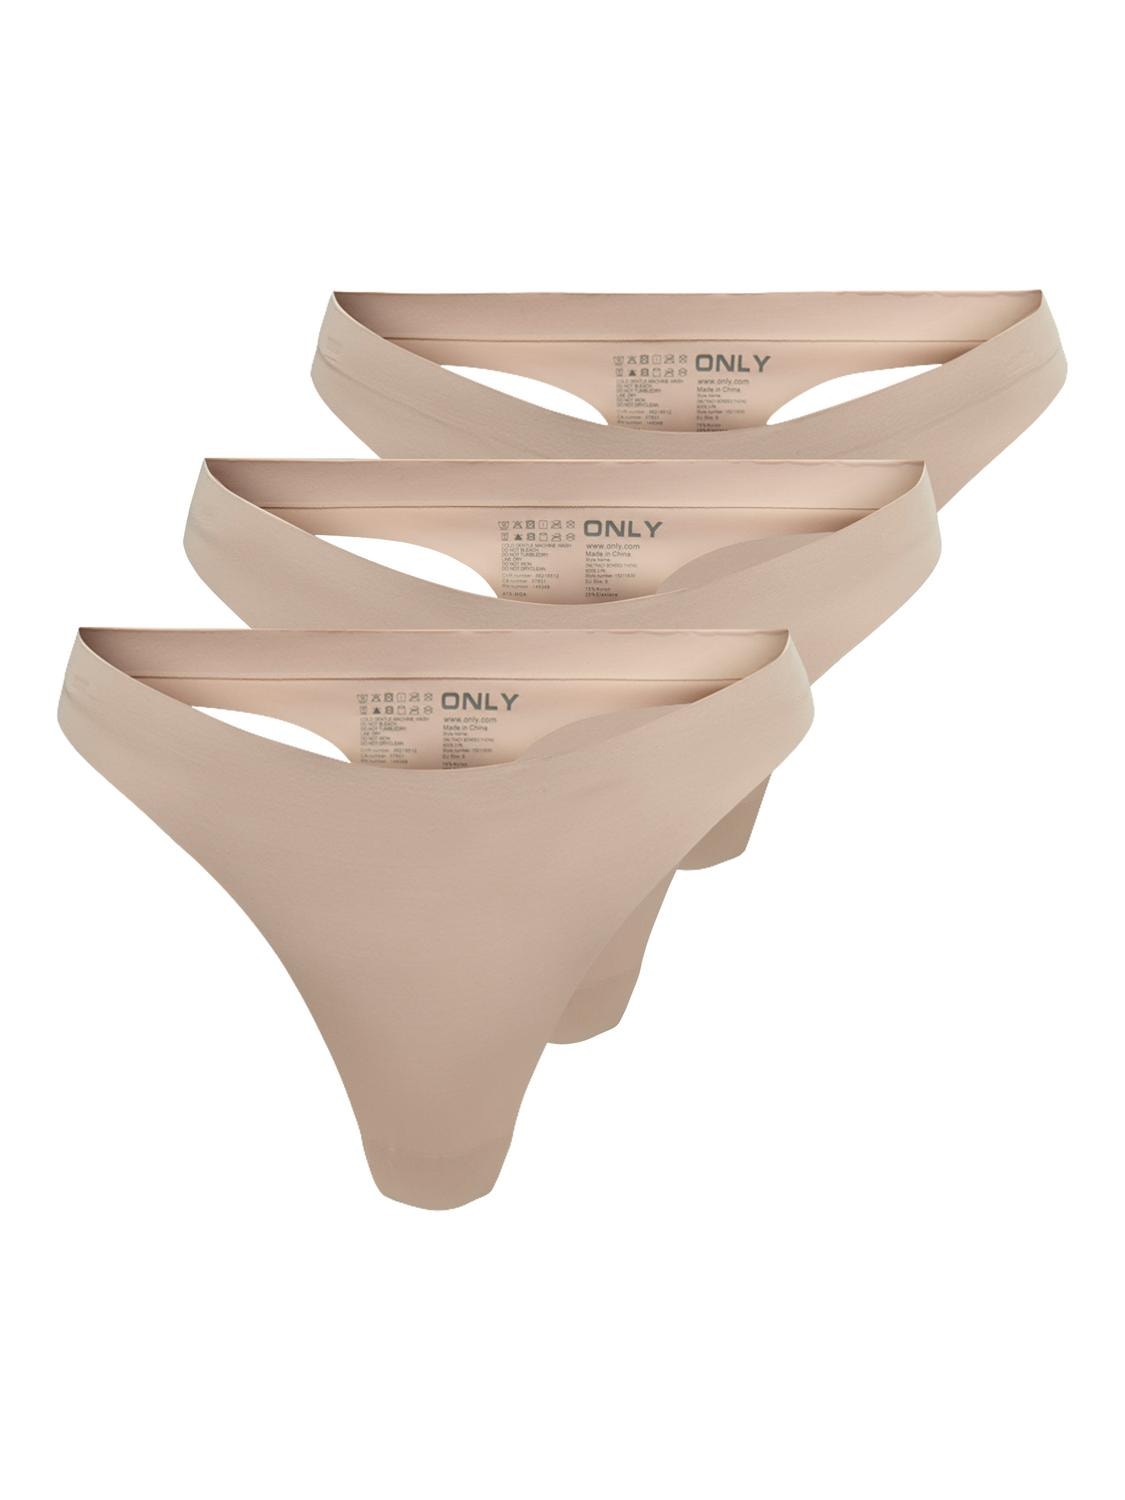 https://images.only.com/15211630/4261254/001/only-3-packseamlessthong-brown.jpg?v=30ed62a6e541301d12aa8421b0b25702&format=webp&width=1280&quality=90&key=25-0-3